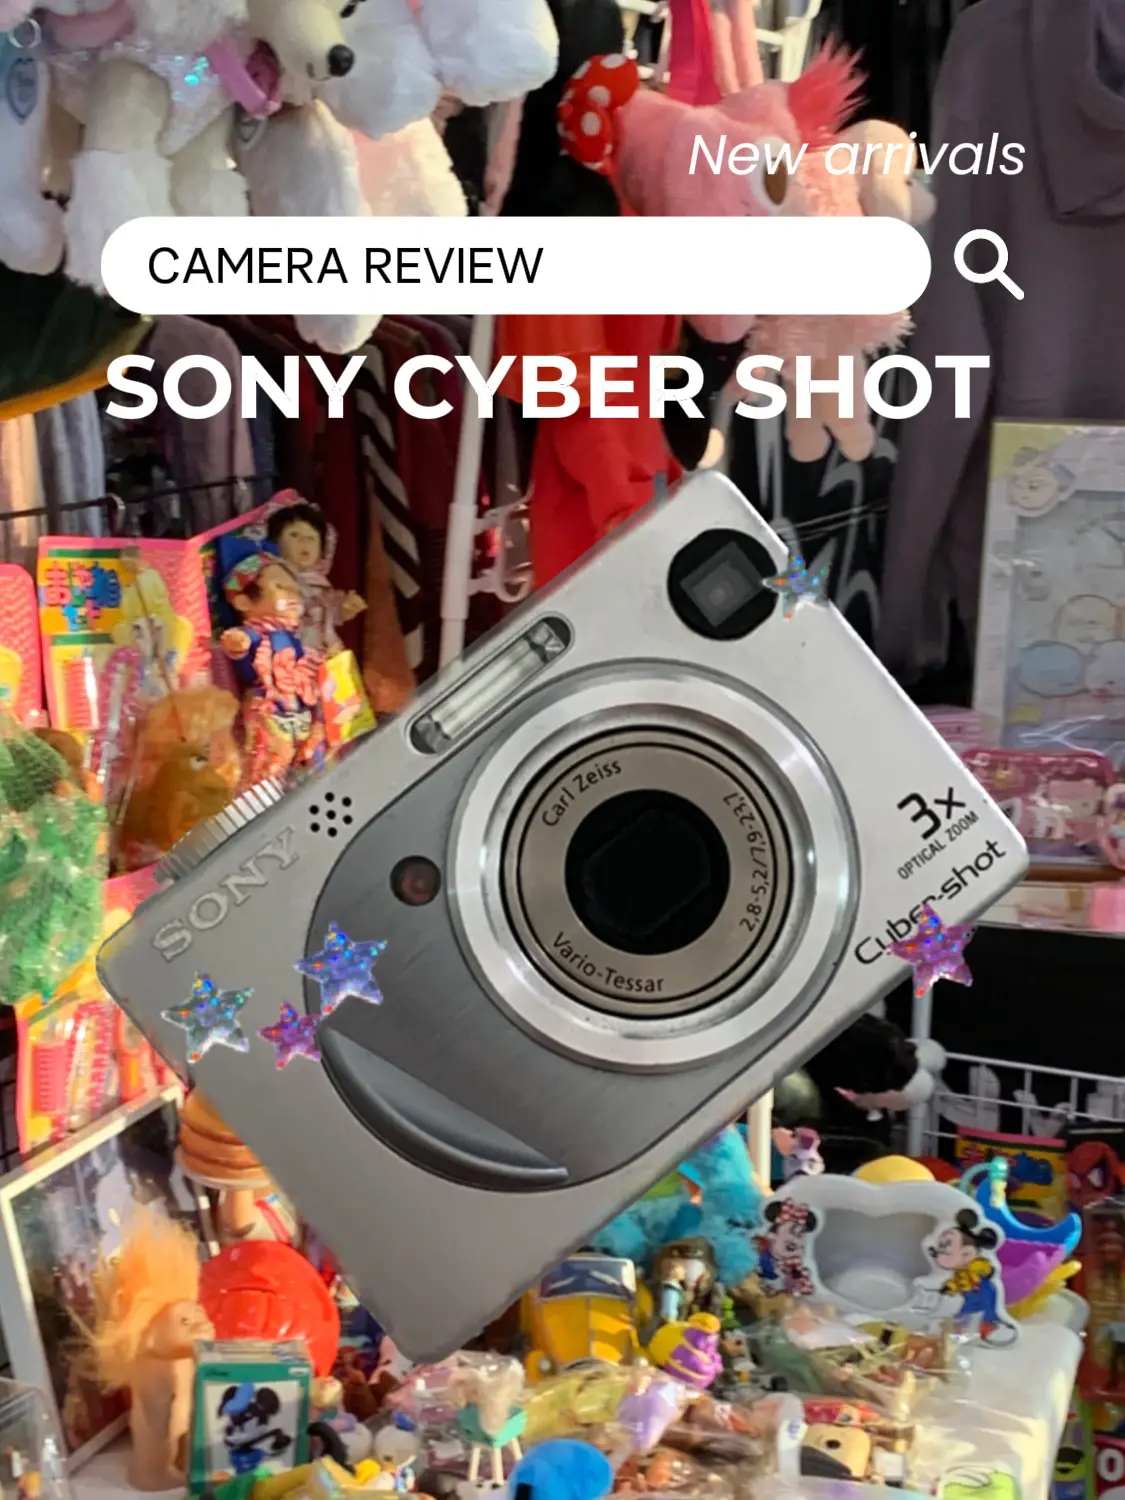 Sony cyber shot review super digital camera y2k, Gallery posted by dym